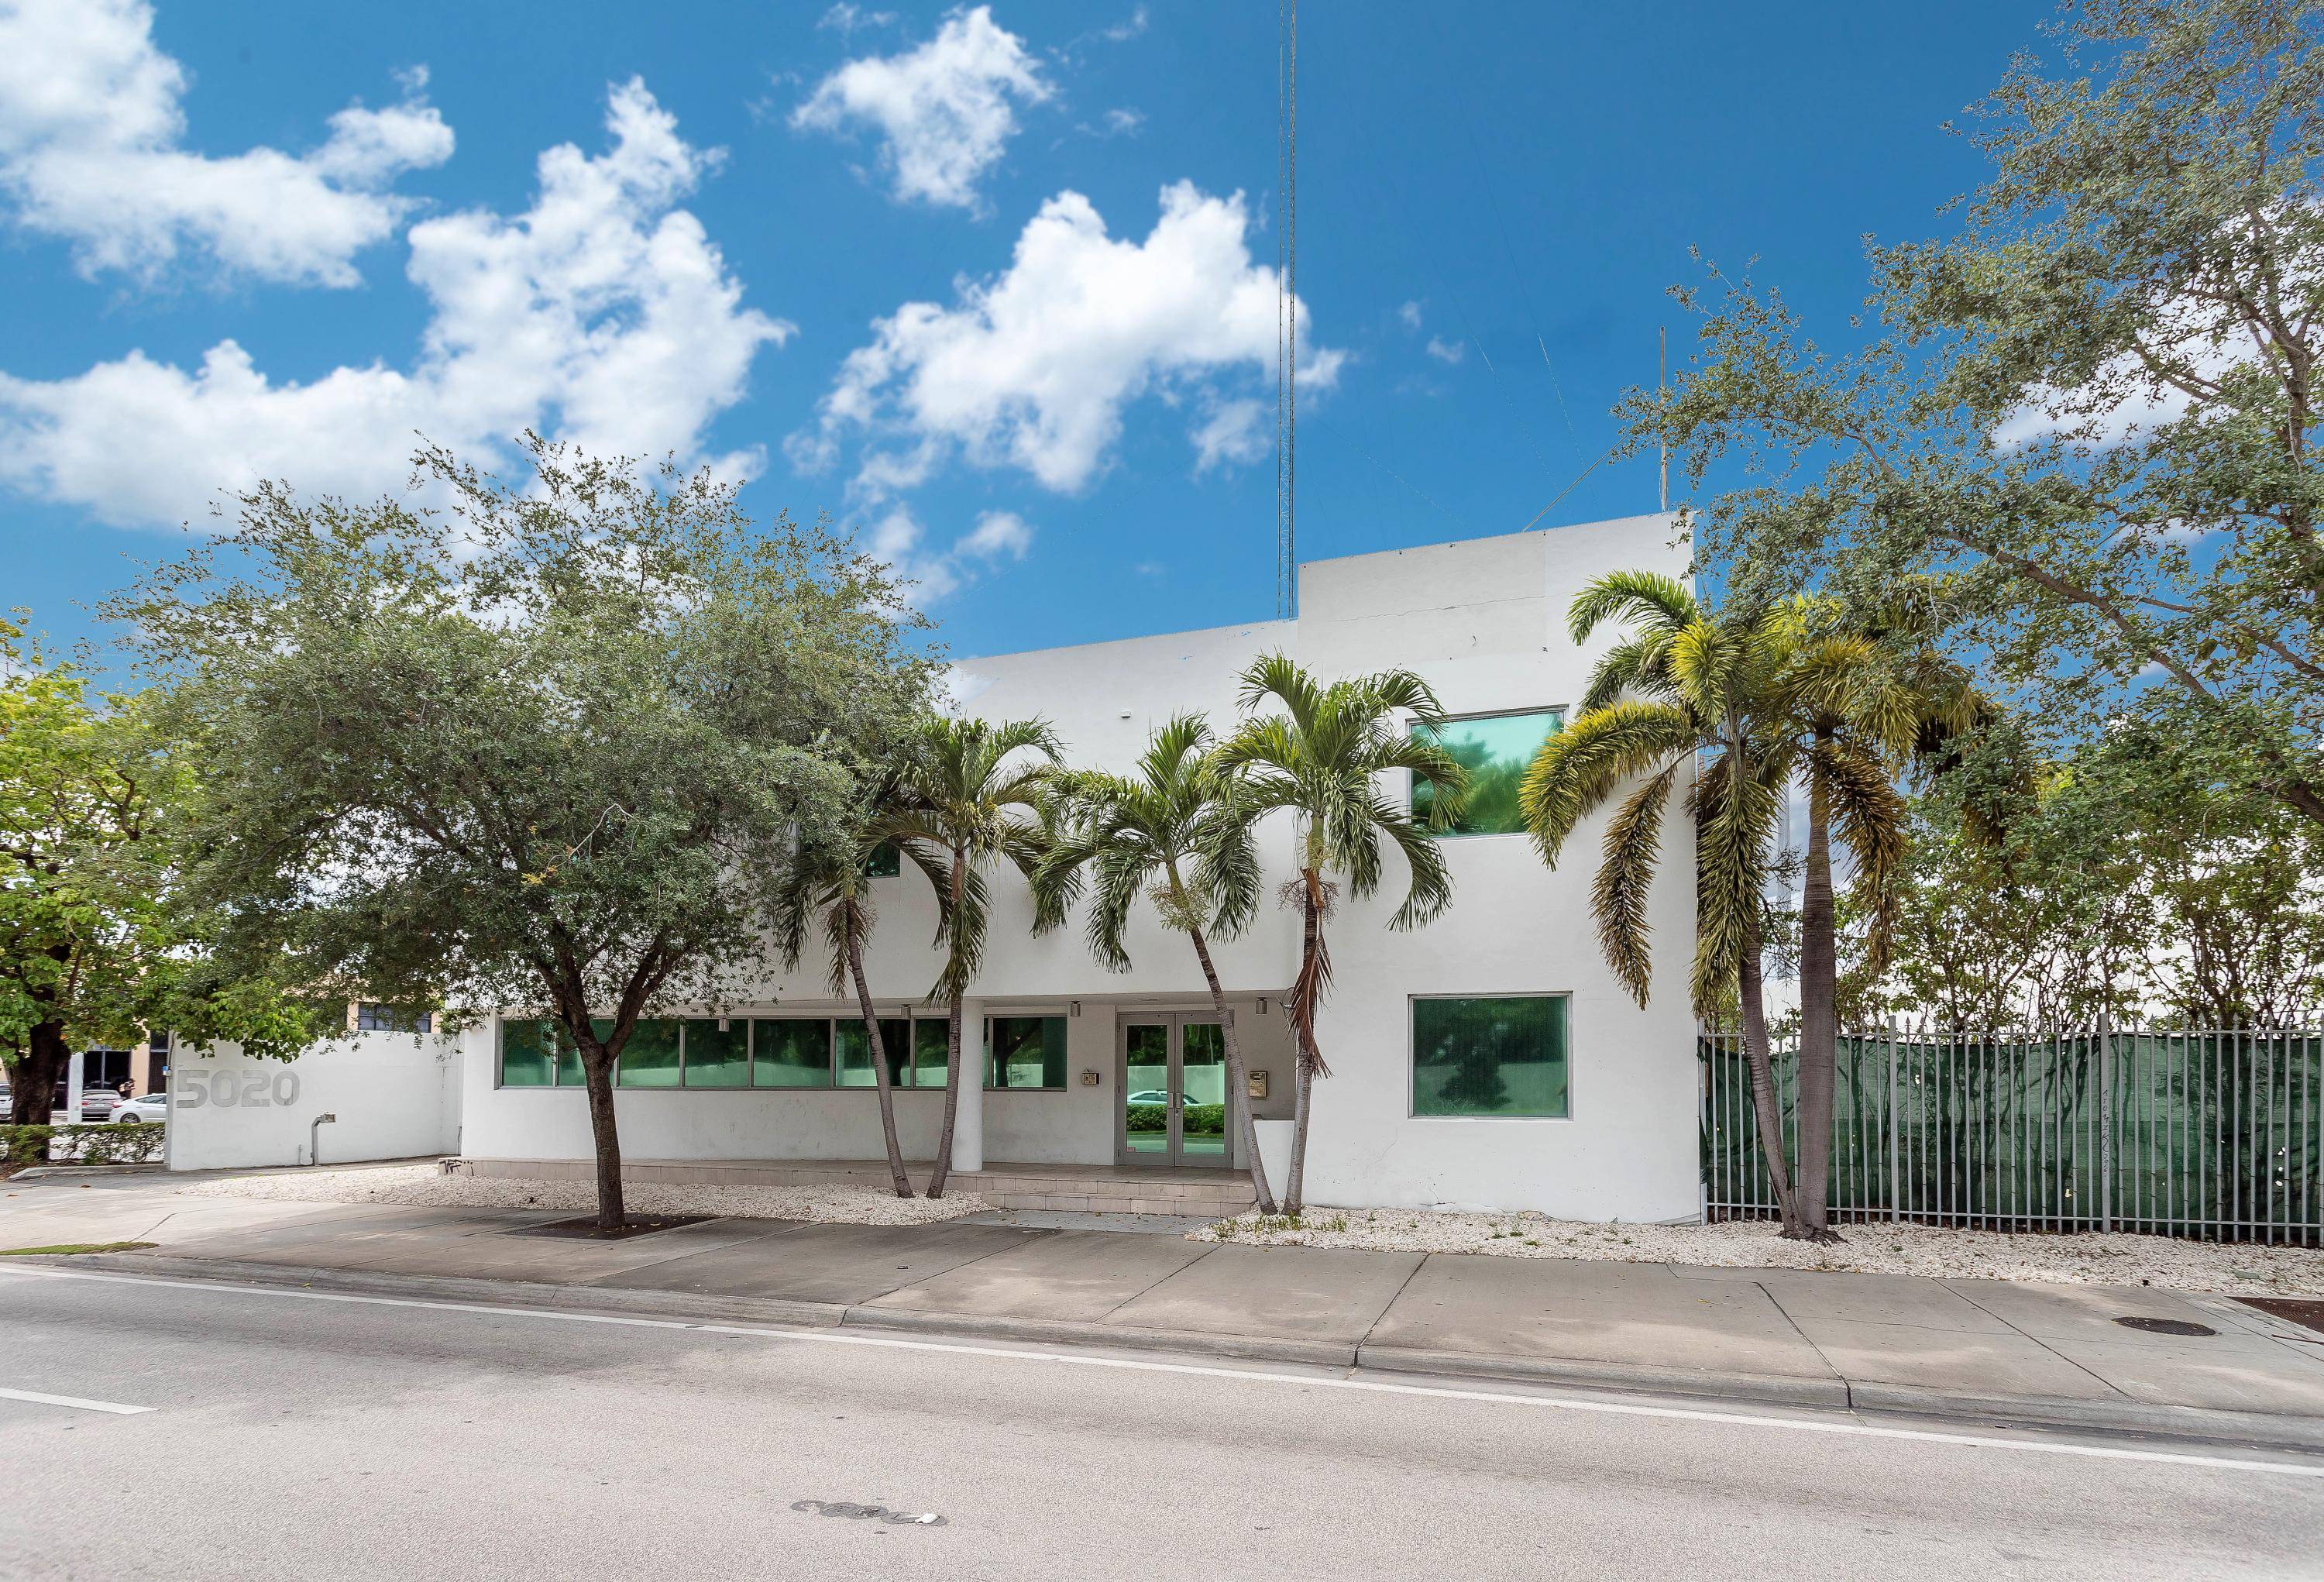 Investment Grade Credit Tenant, 5 Year Lease Commercial Zoned C 1 Building, Private Gated State of the Art Recording Studio Half Acre Lot, 16 Parking Spaces, 34 Camera Security System, ...